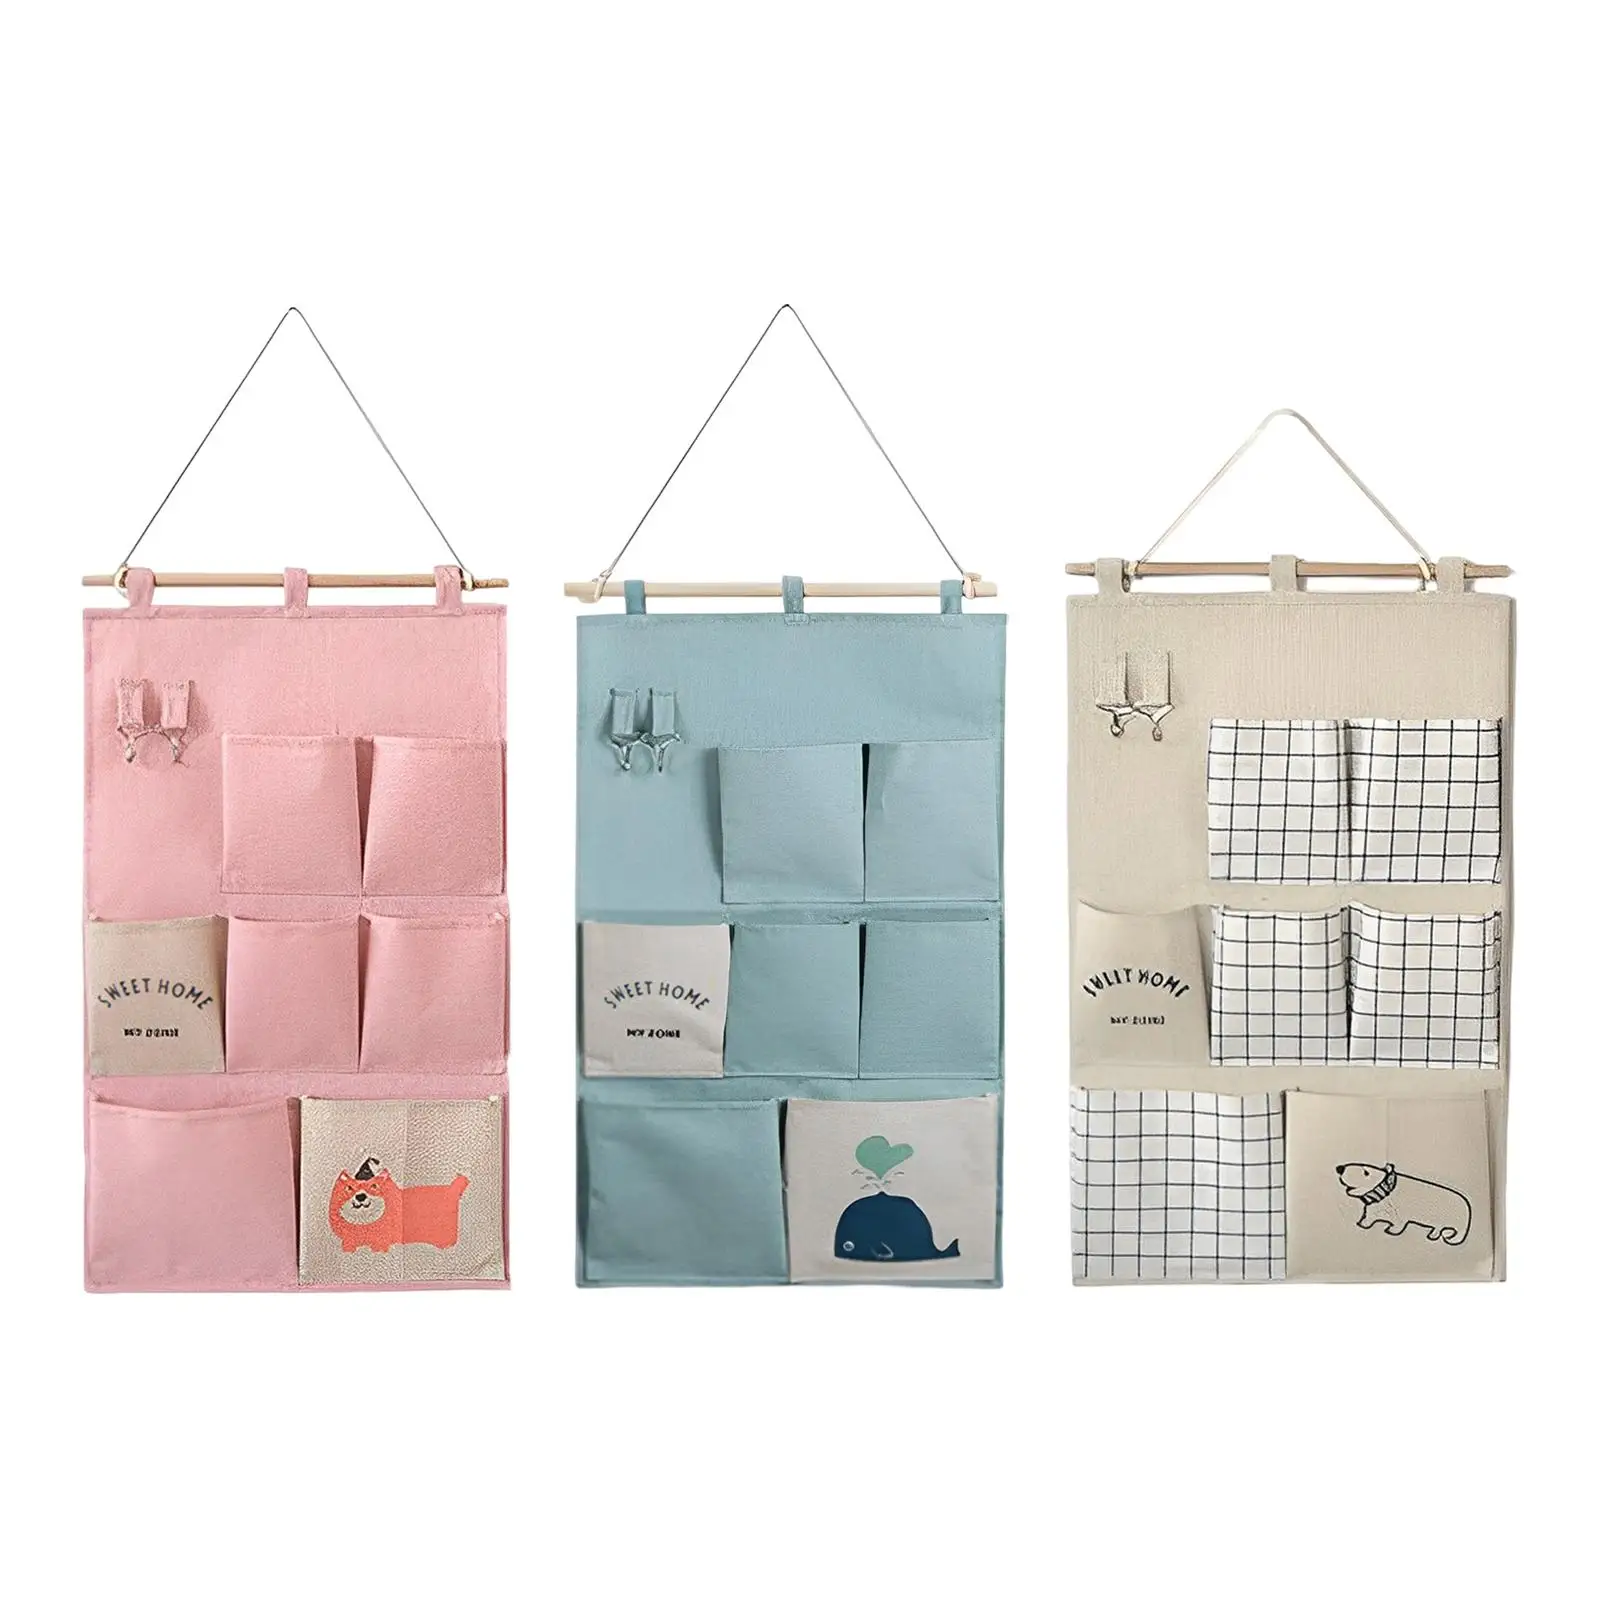 Wall Door Hanging Bag Organizer Shelves Large for Pantry Office Dormitory